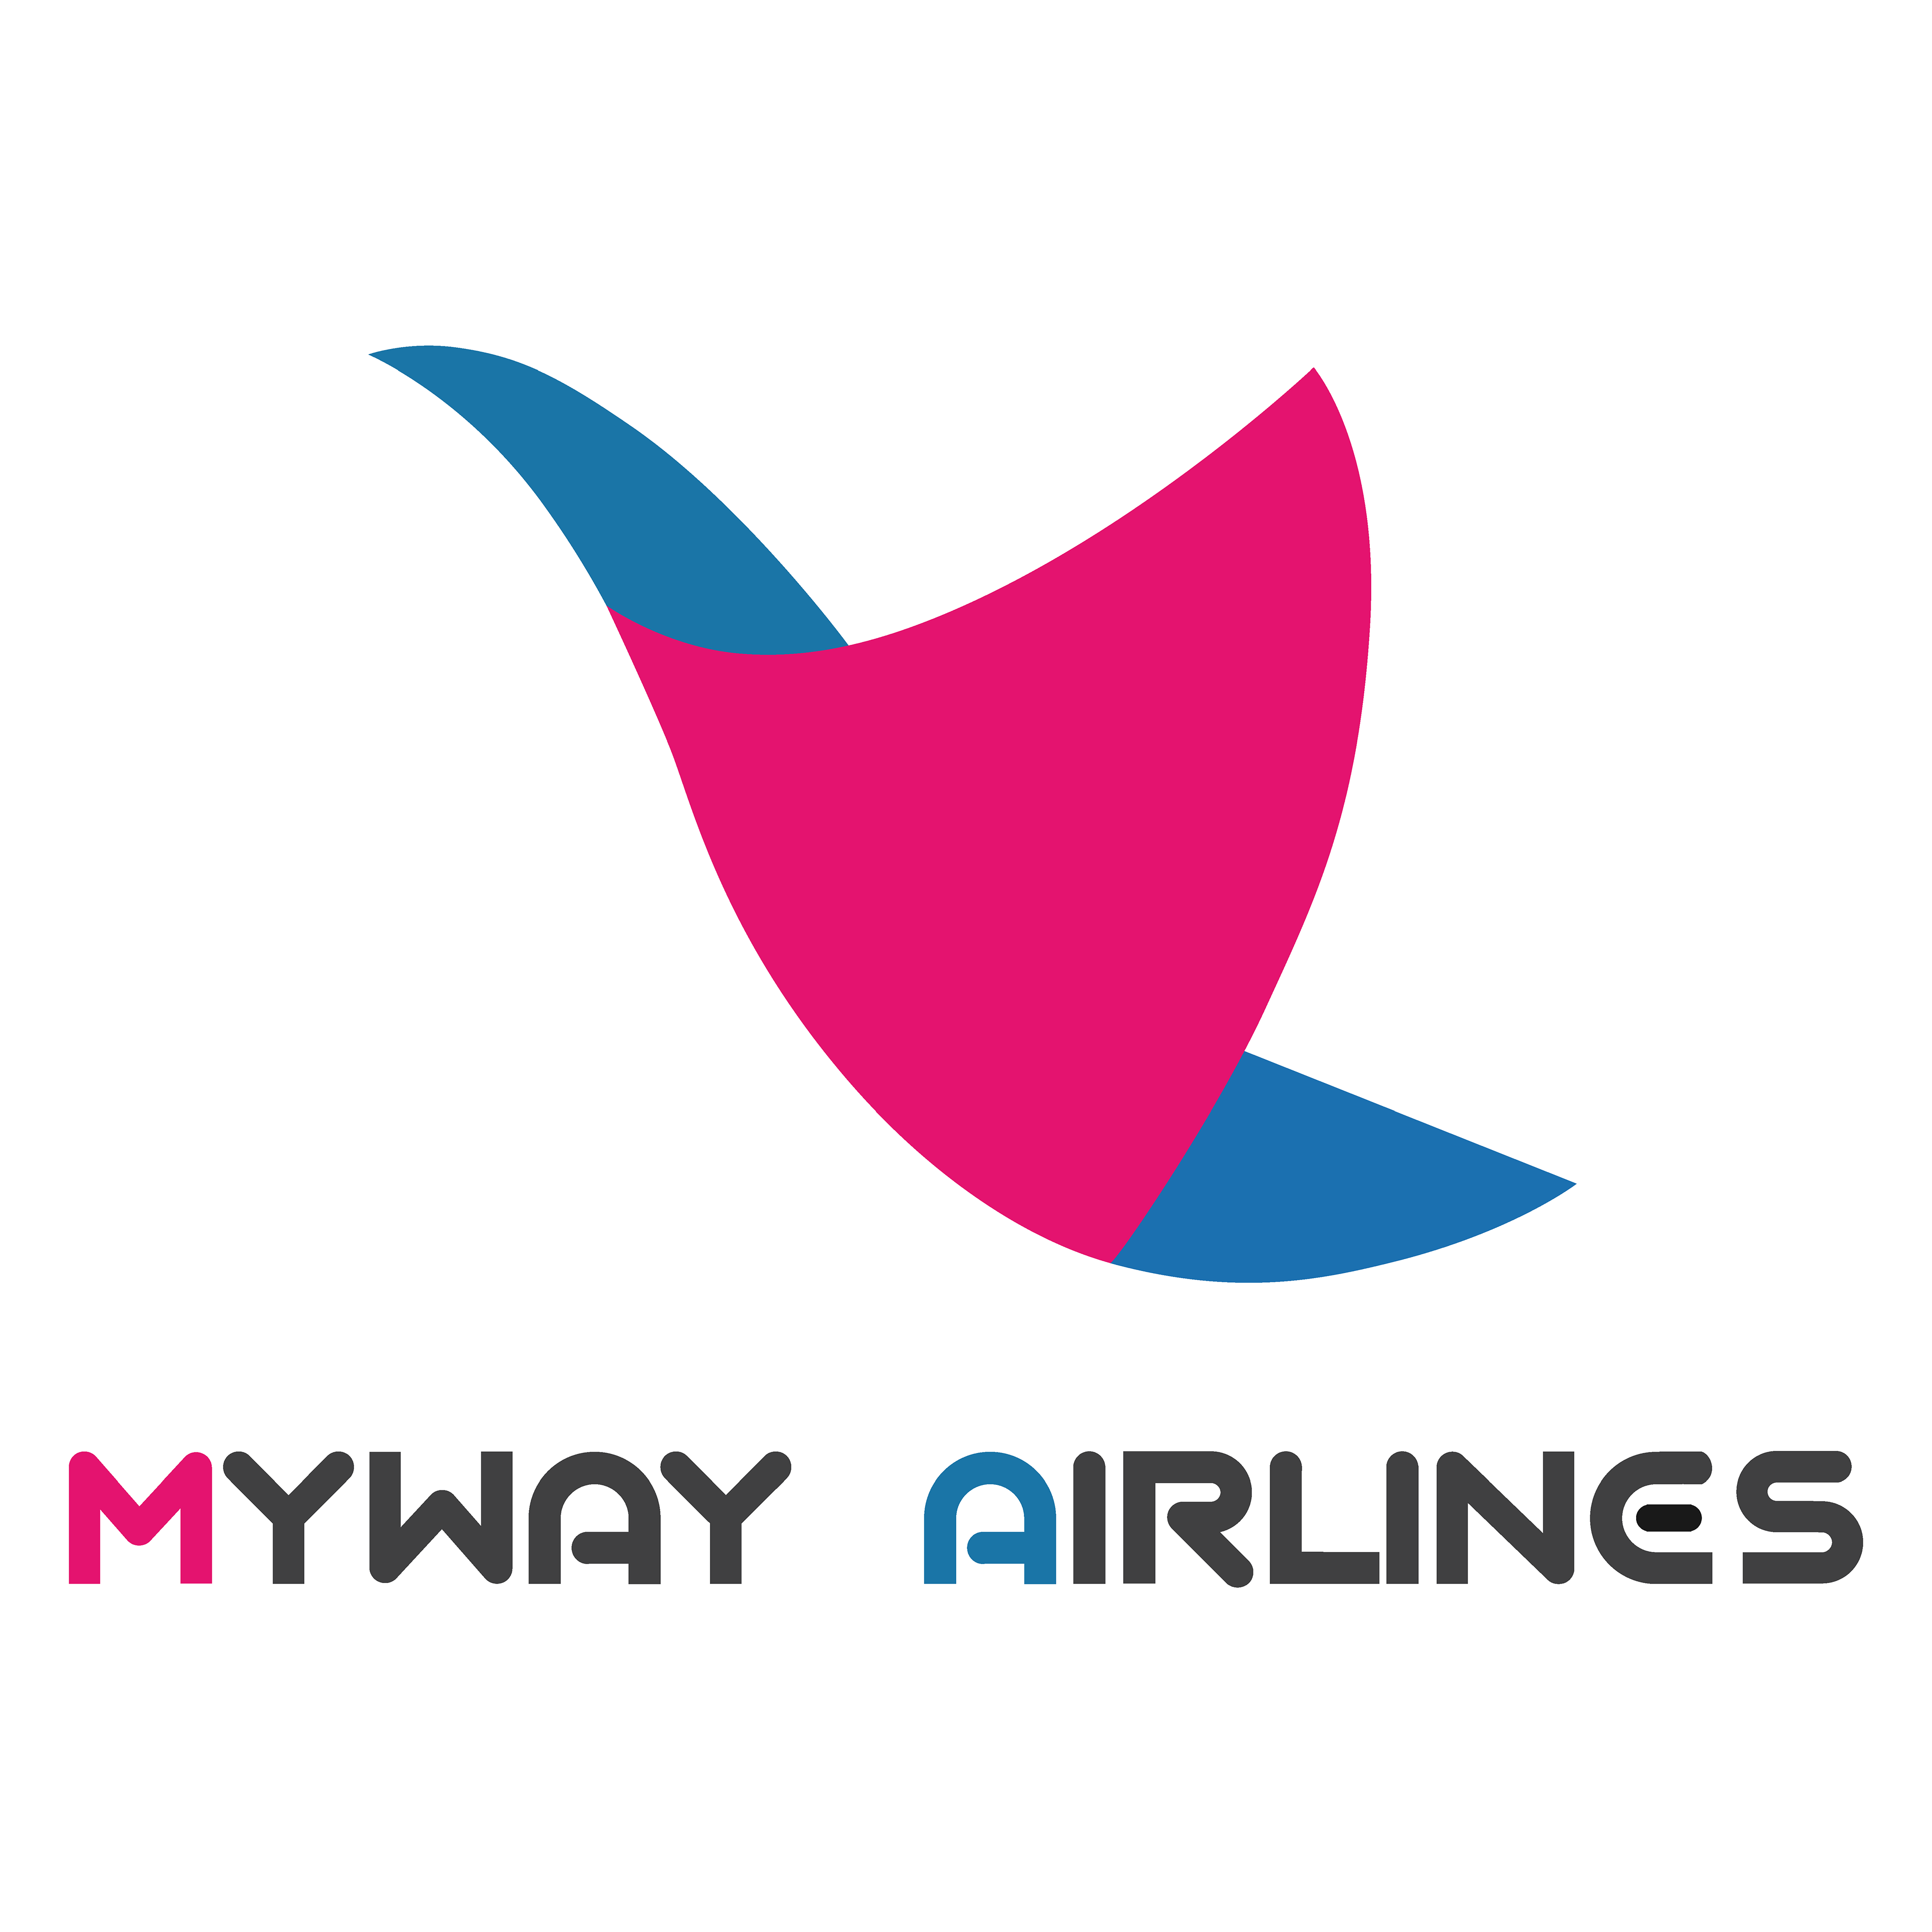 Myway airlines